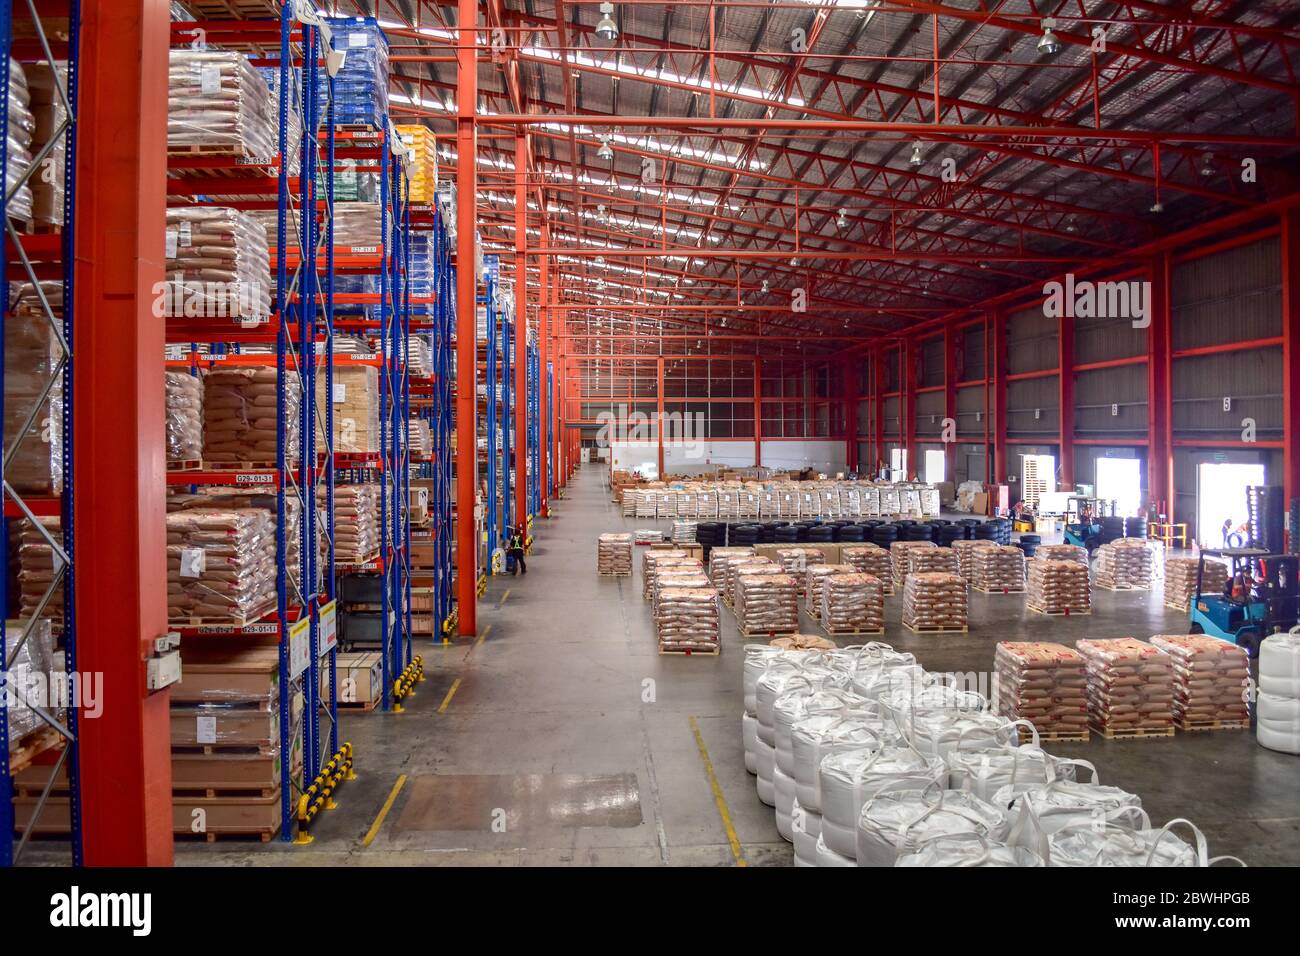 High view of cargo shorting area inside large distribution warehouse. Stock Photo